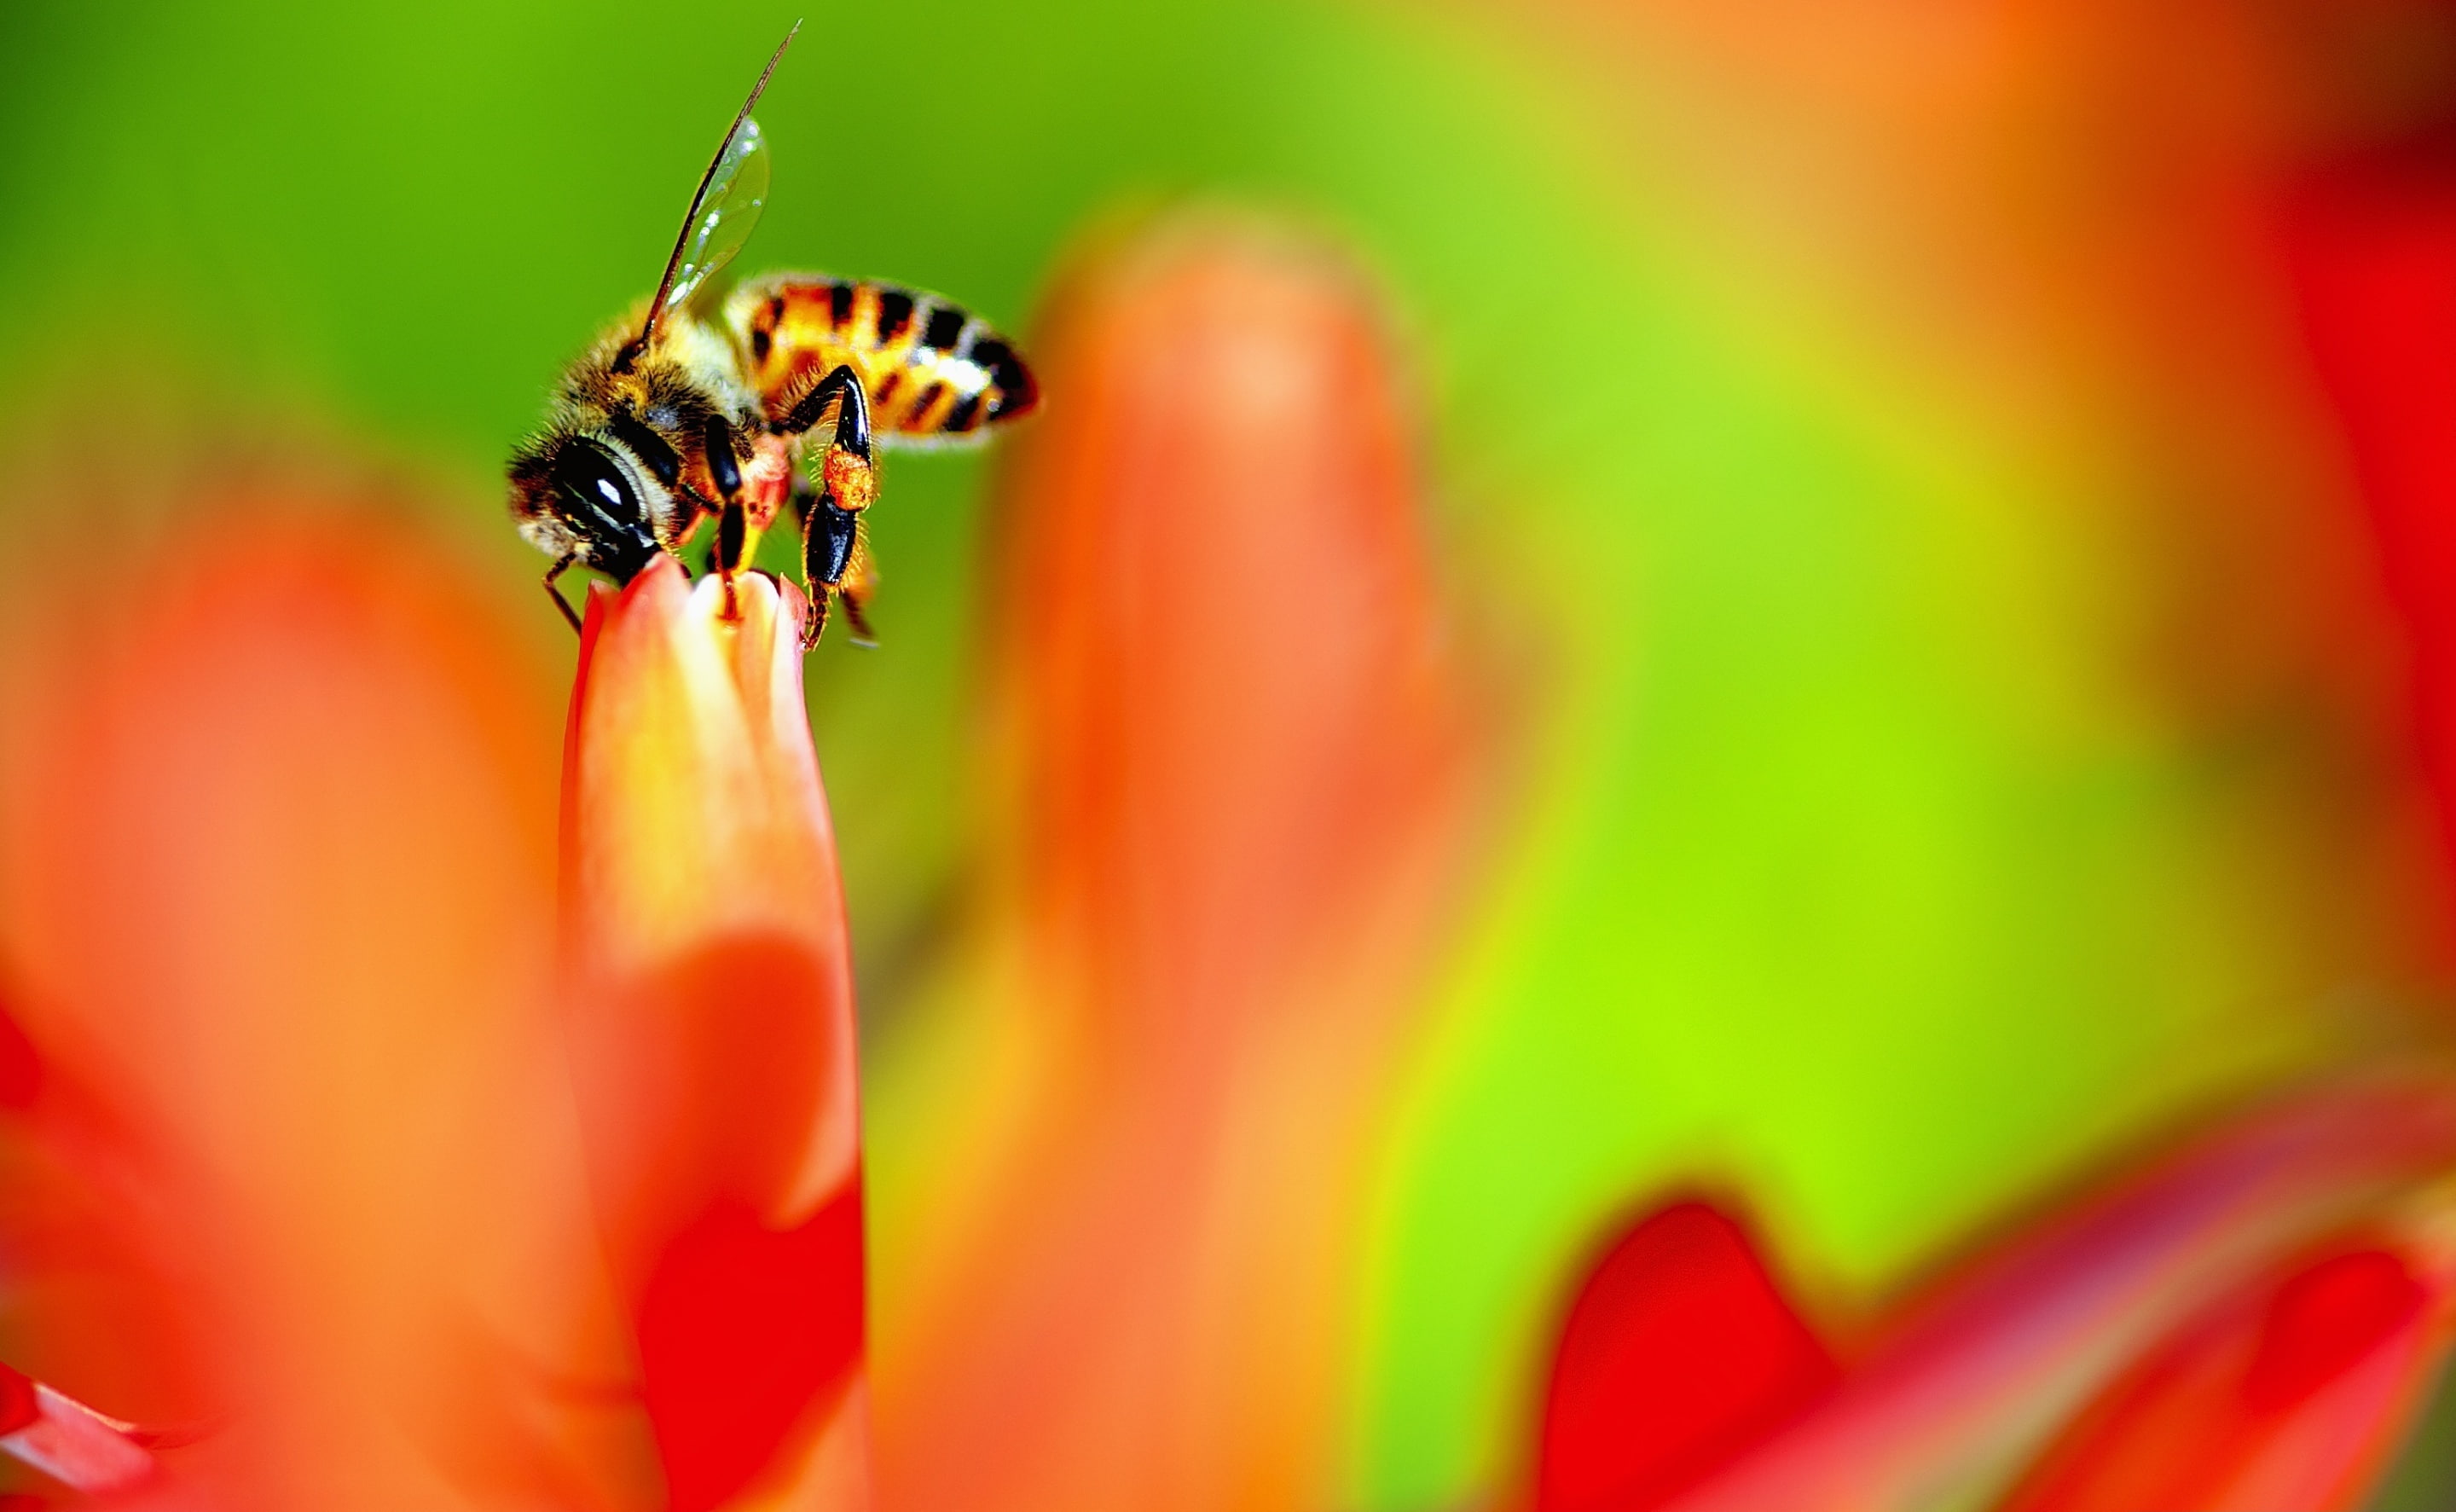 Honey Bee collecting Nectar from a Flower, Animals, Insects, Nature